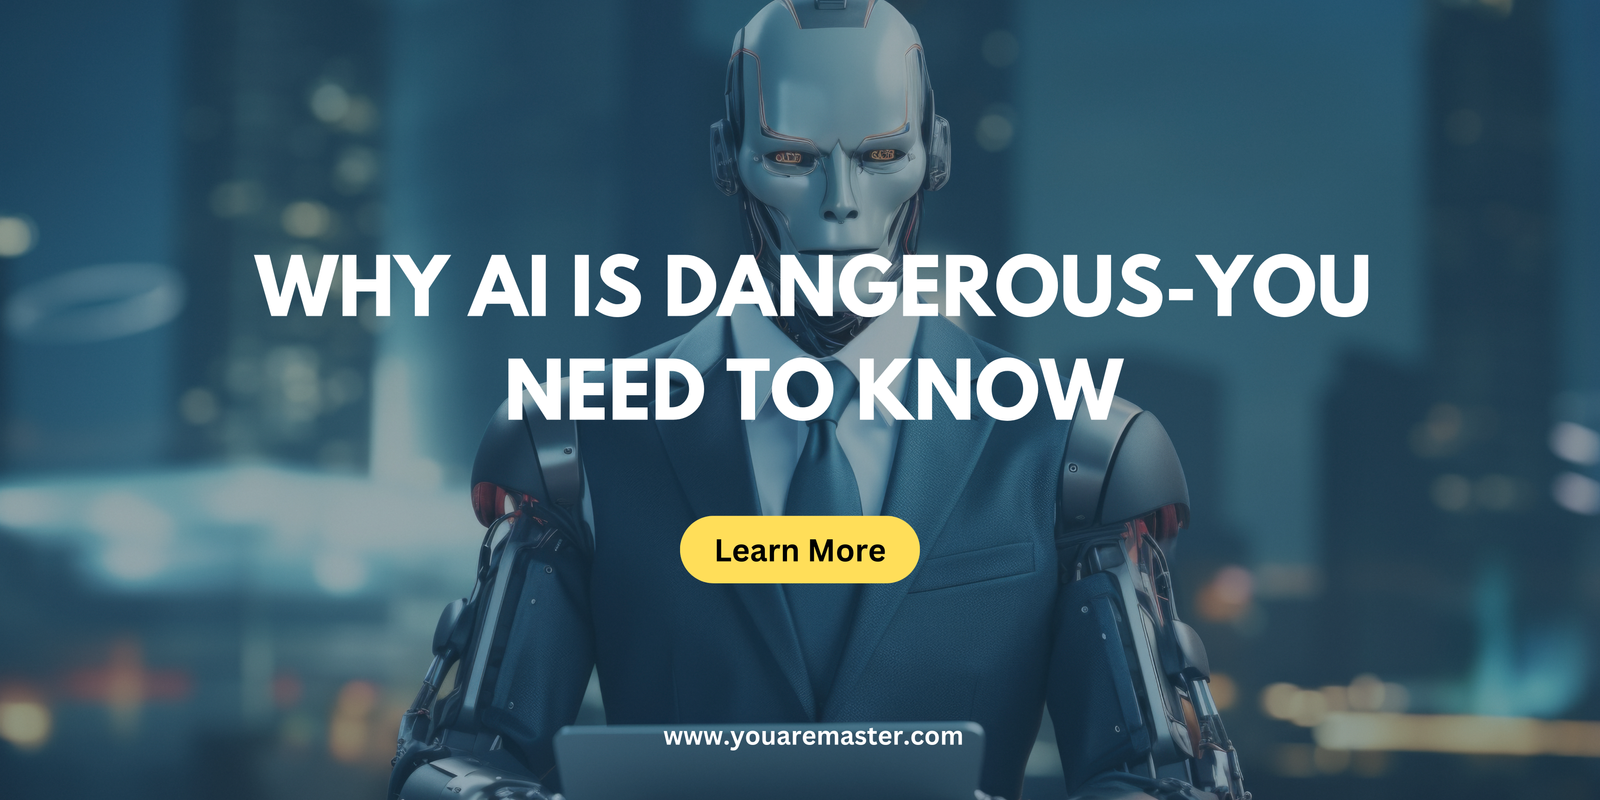 Why AI is Dangerous-You Need to Know